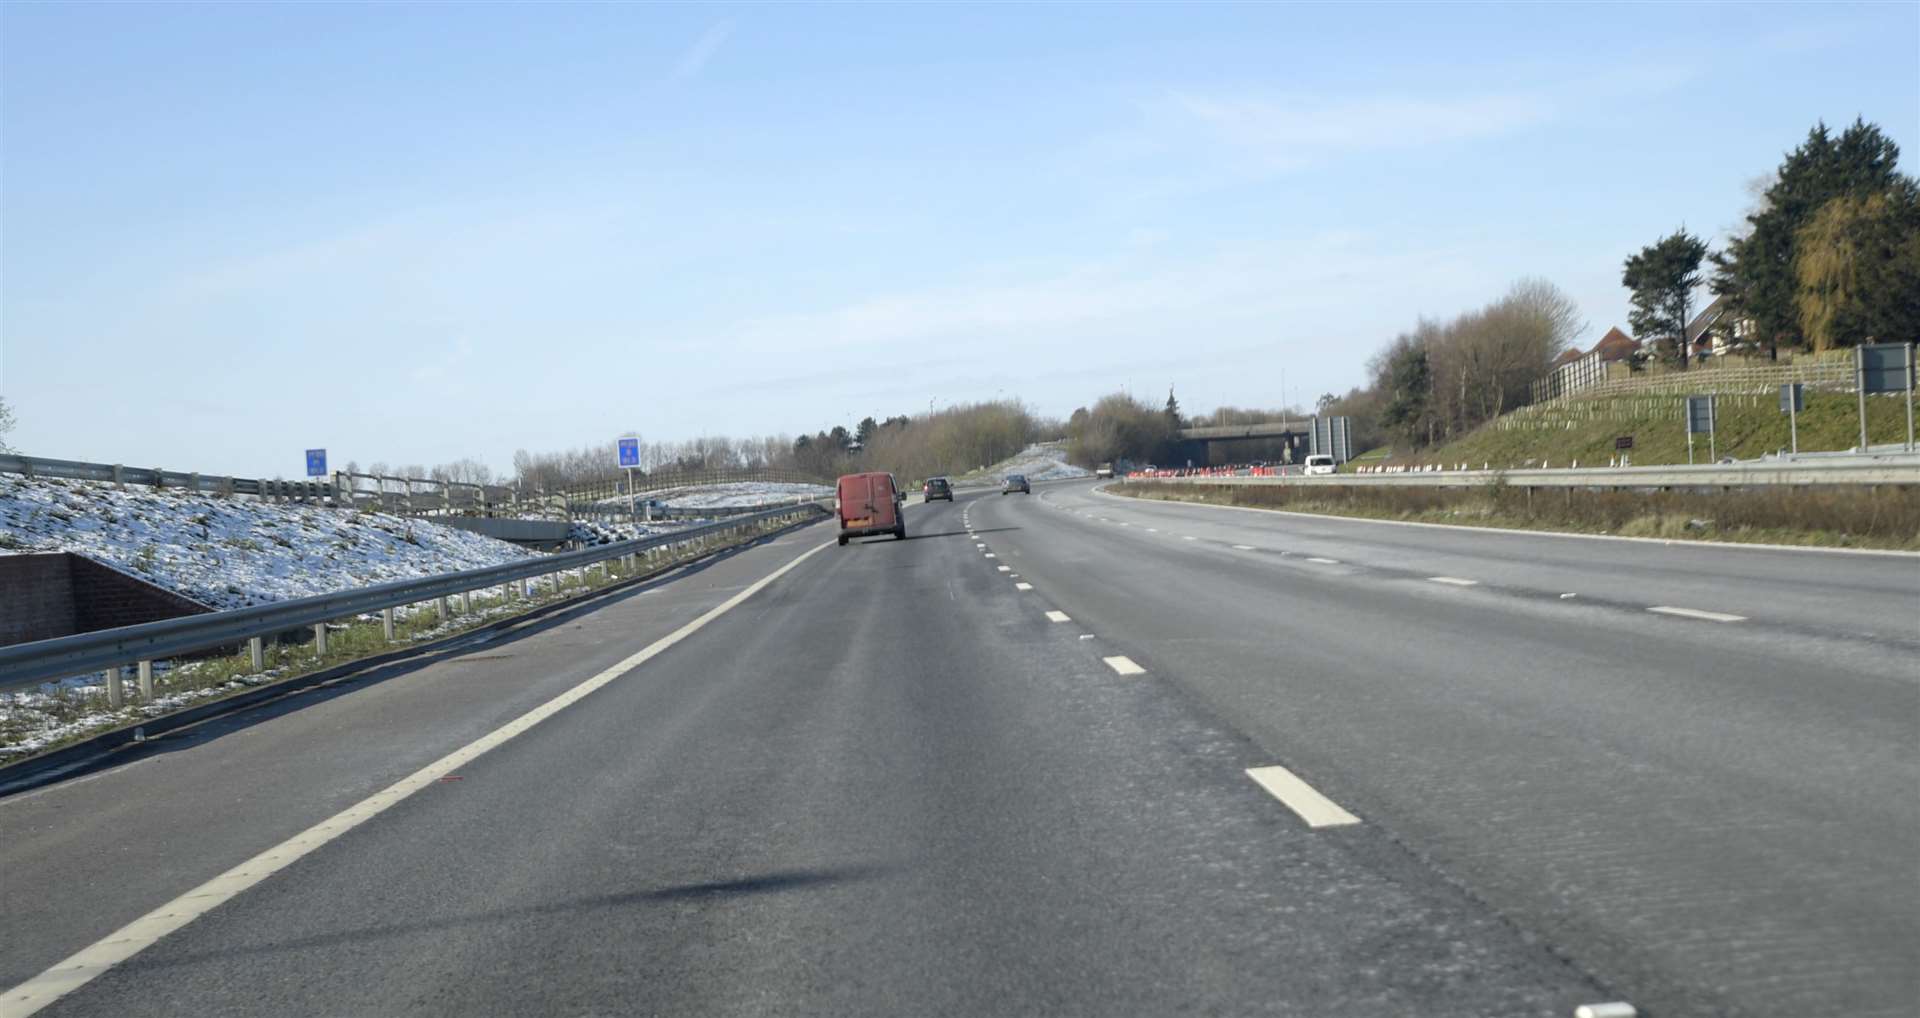 The M20 approaching the Junction 10a area. Library image